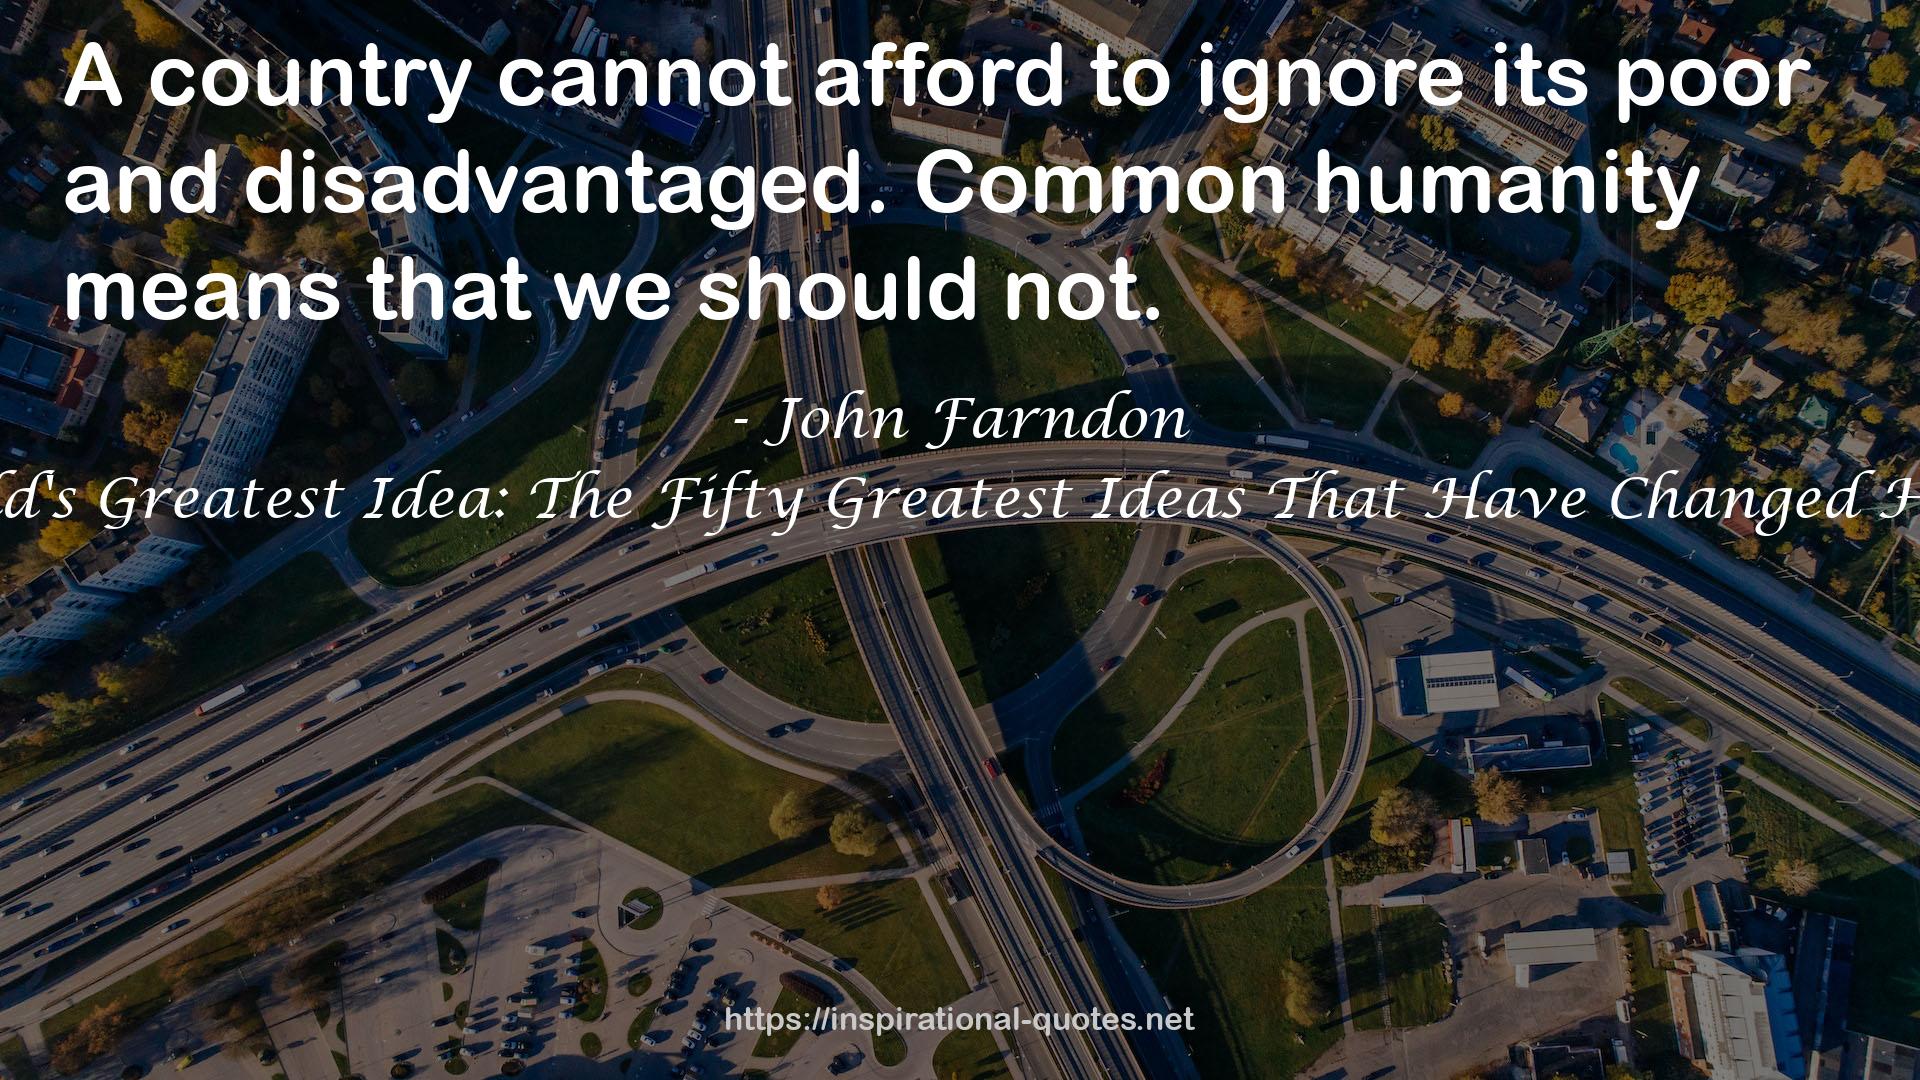 The World's Greatest Idea: The Fifty Greatest Ideas That Have Changed Humanity QUOTES